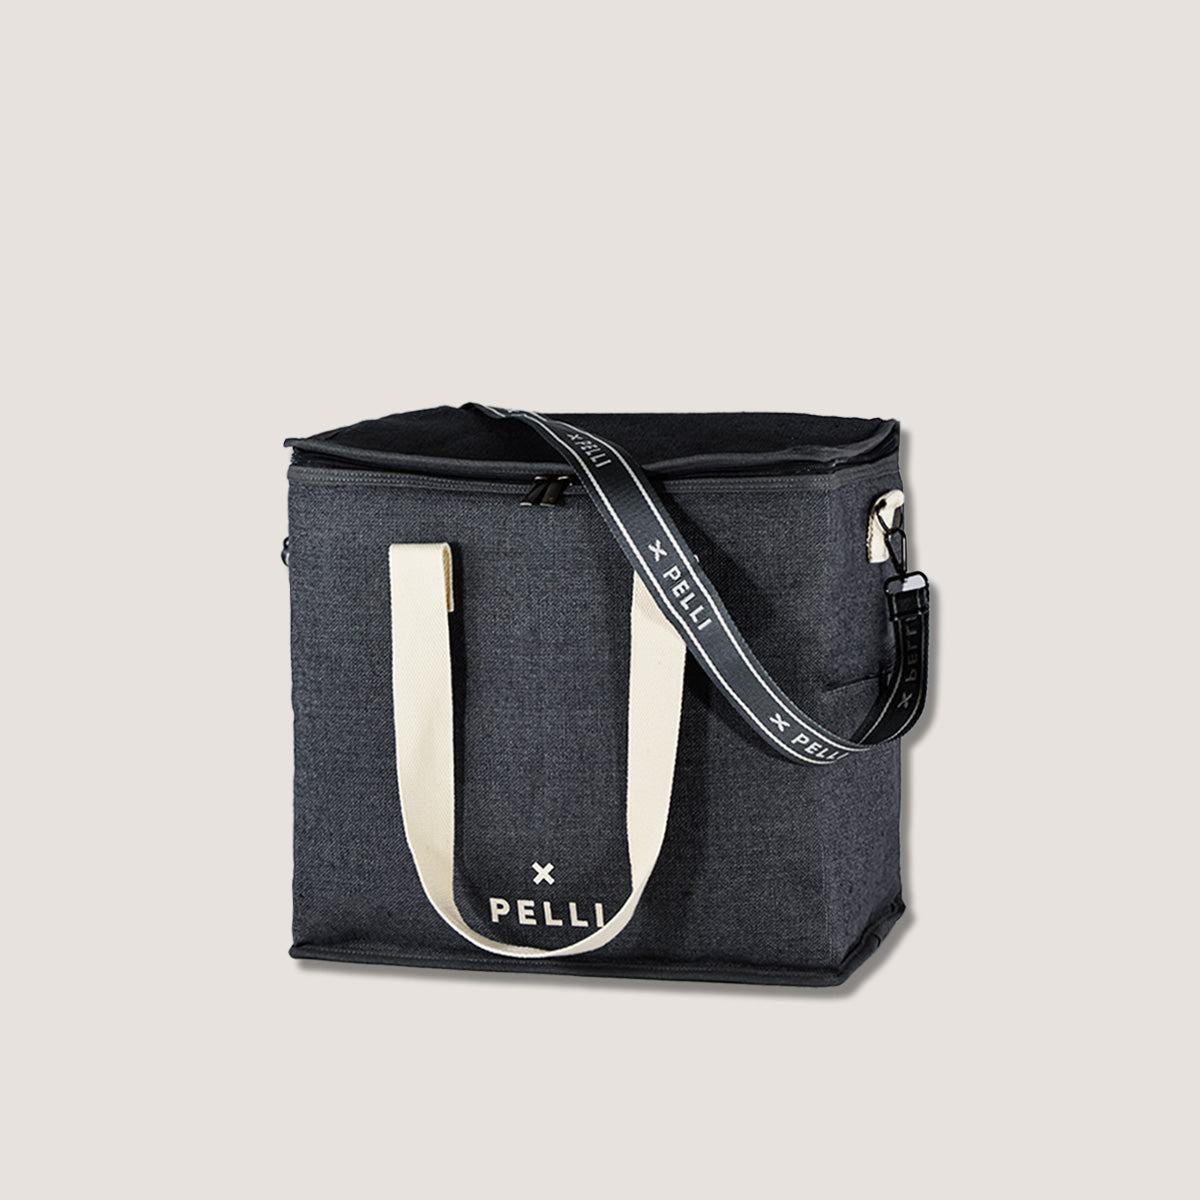 OK Chill Crossbody - Jute Medium Cooler Bag with Shoulder Strap in Charcoal Grey